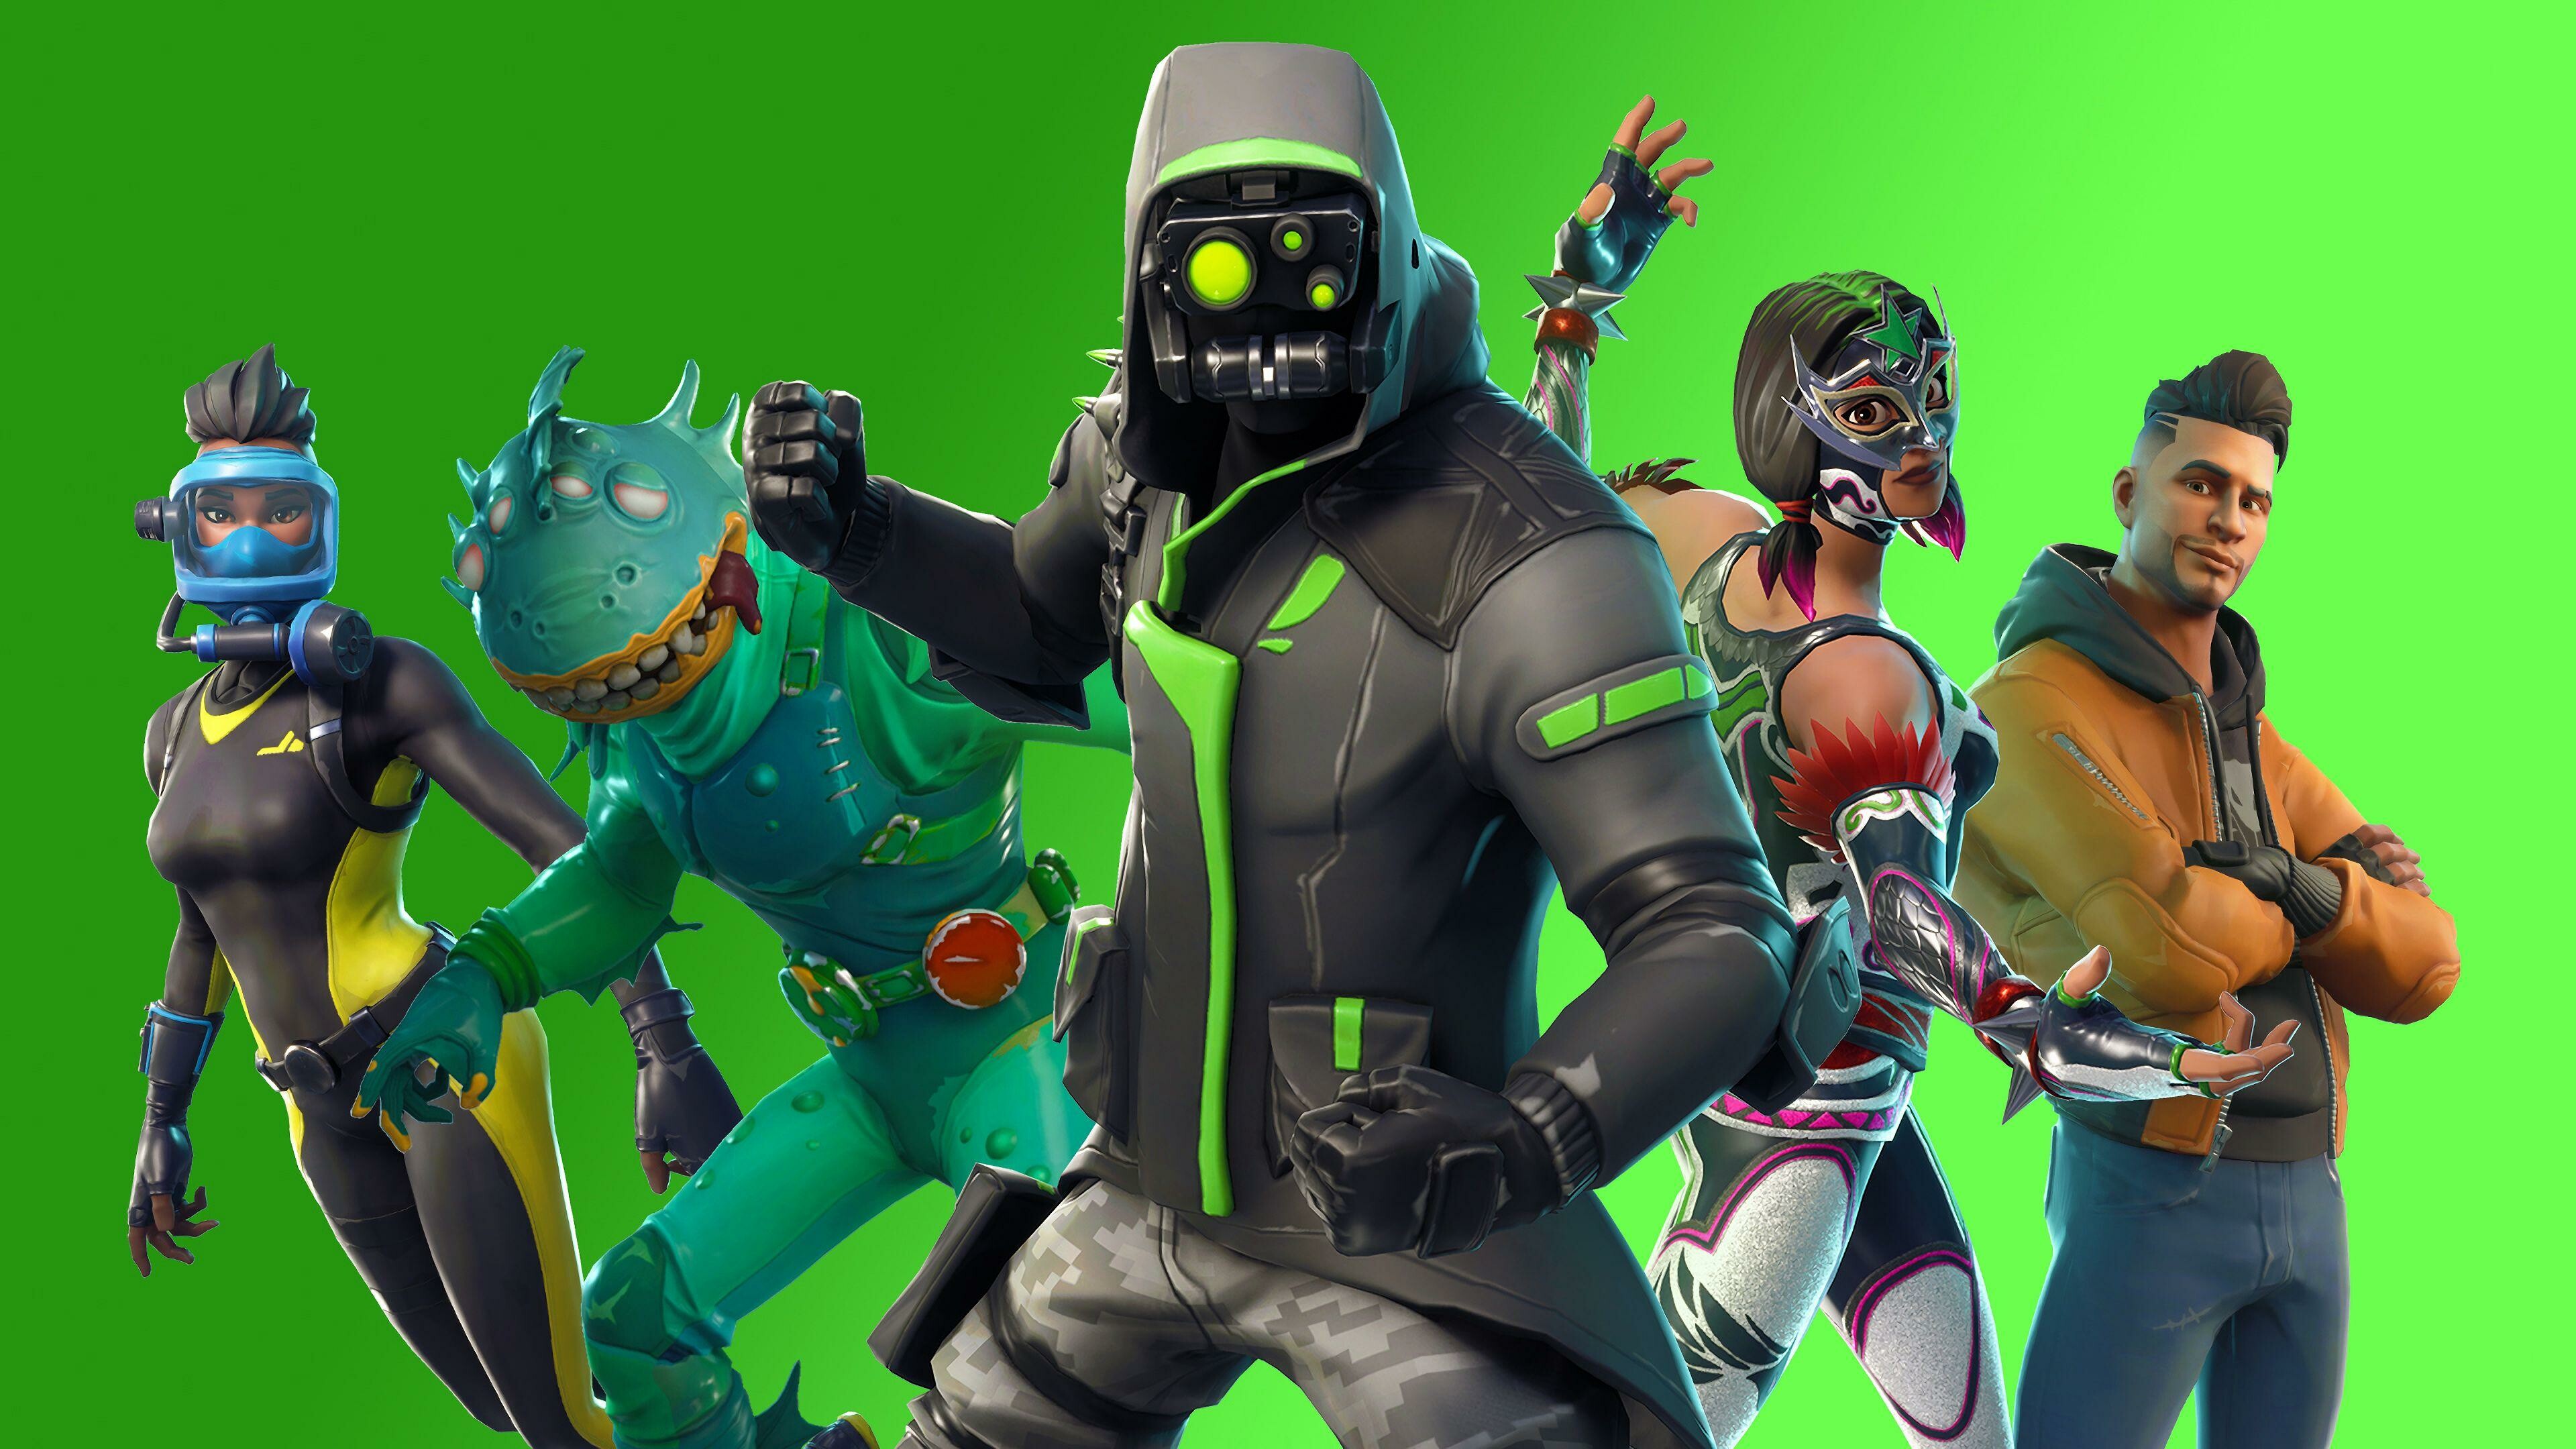 Fortnite: Game characters, A battle royale game, developed by Epic Games. 3840x2160 4K Wallpaper.